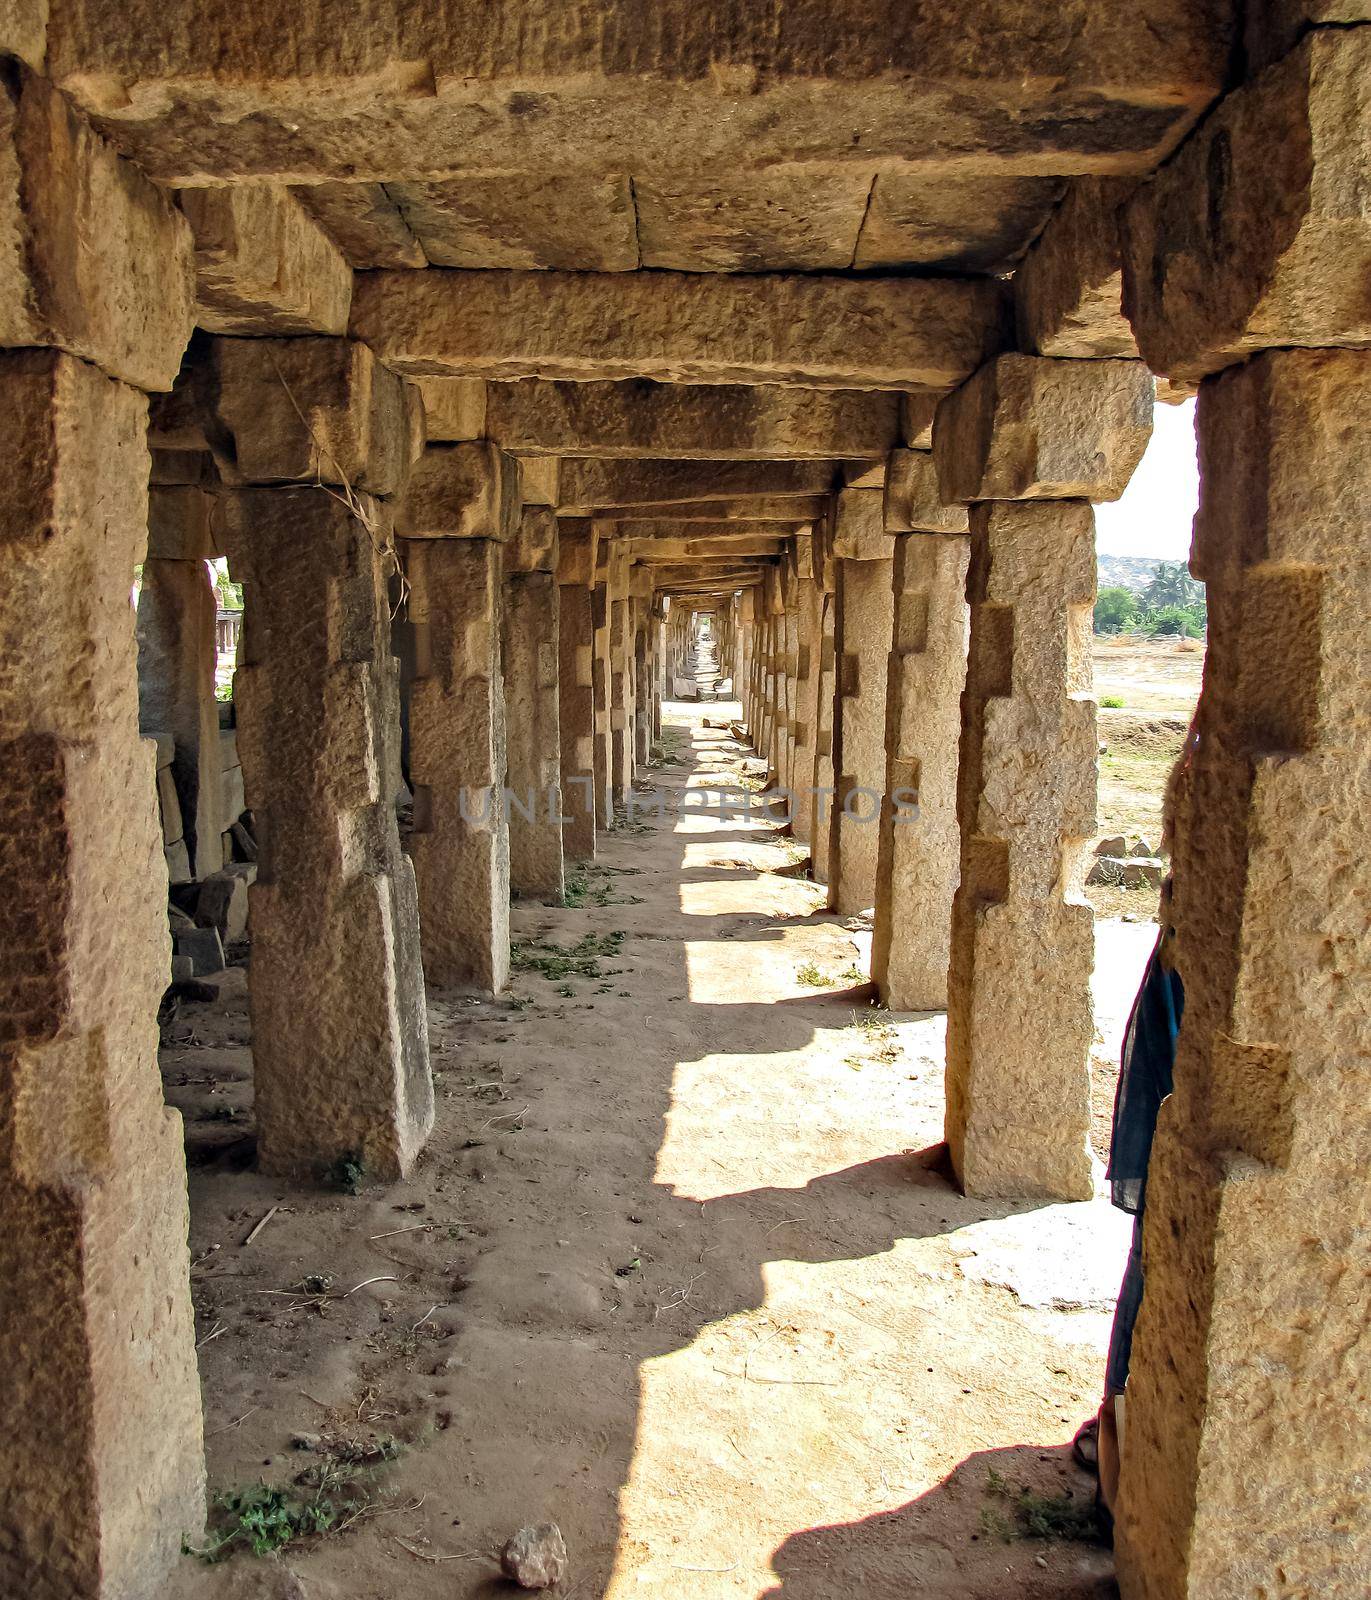 Inside view of ancient stone made Hampi bazaar or market place.